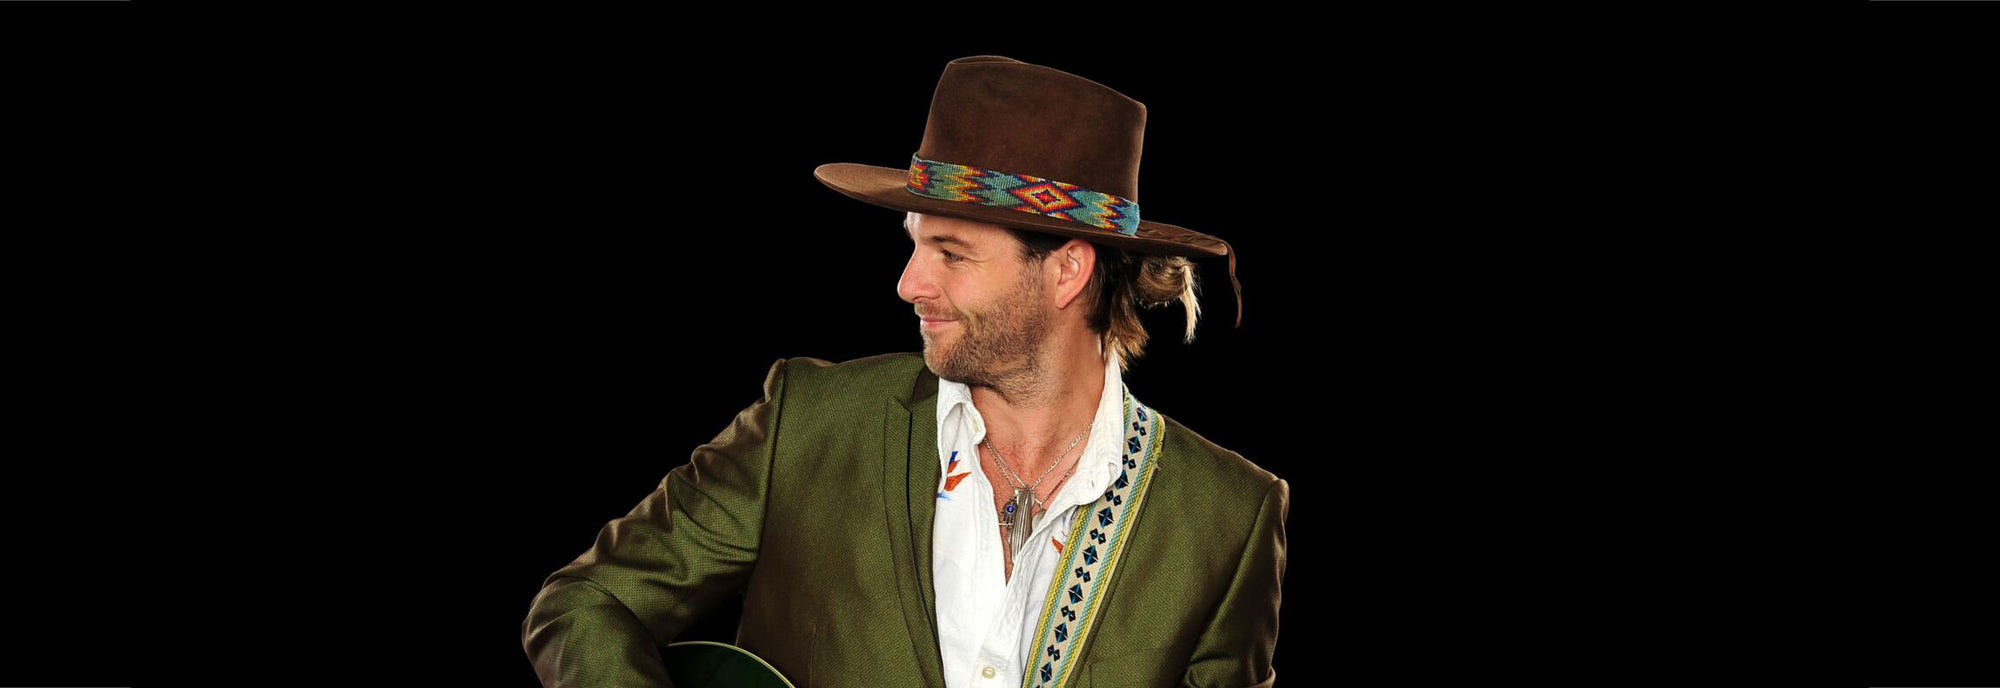 Keith Harkin's 'In The Round' Officially Available